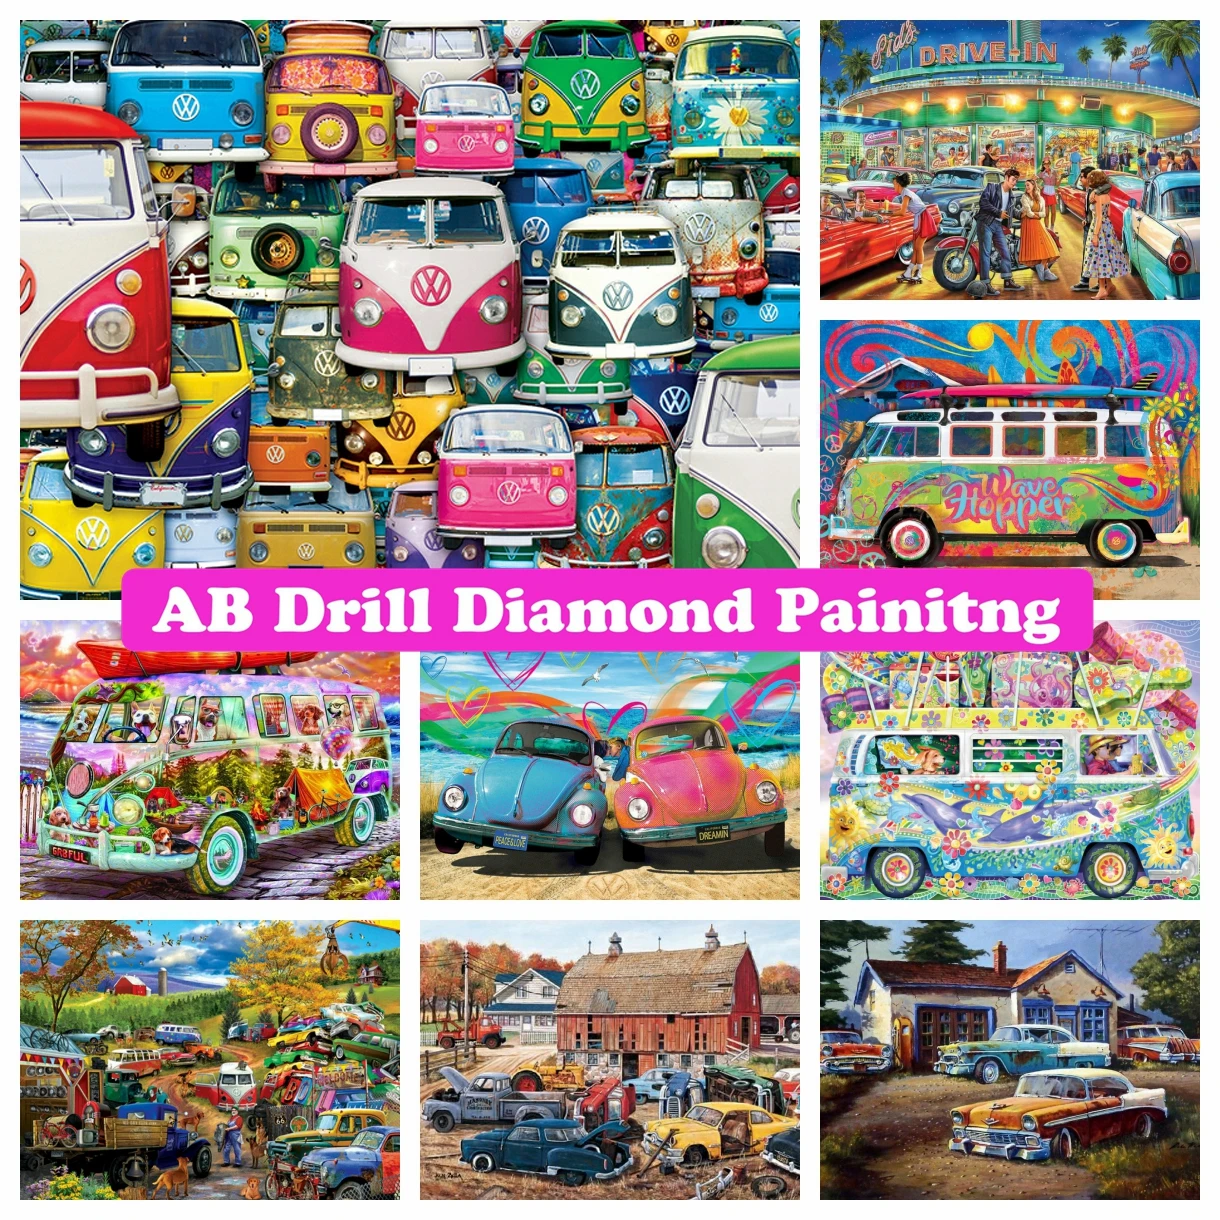 

5D DIY AB Drills Diamond Painting Car Bus Open Country Landscape Art Embroidery Handmade Crafts Cross Stitch Mosaic Room Decor